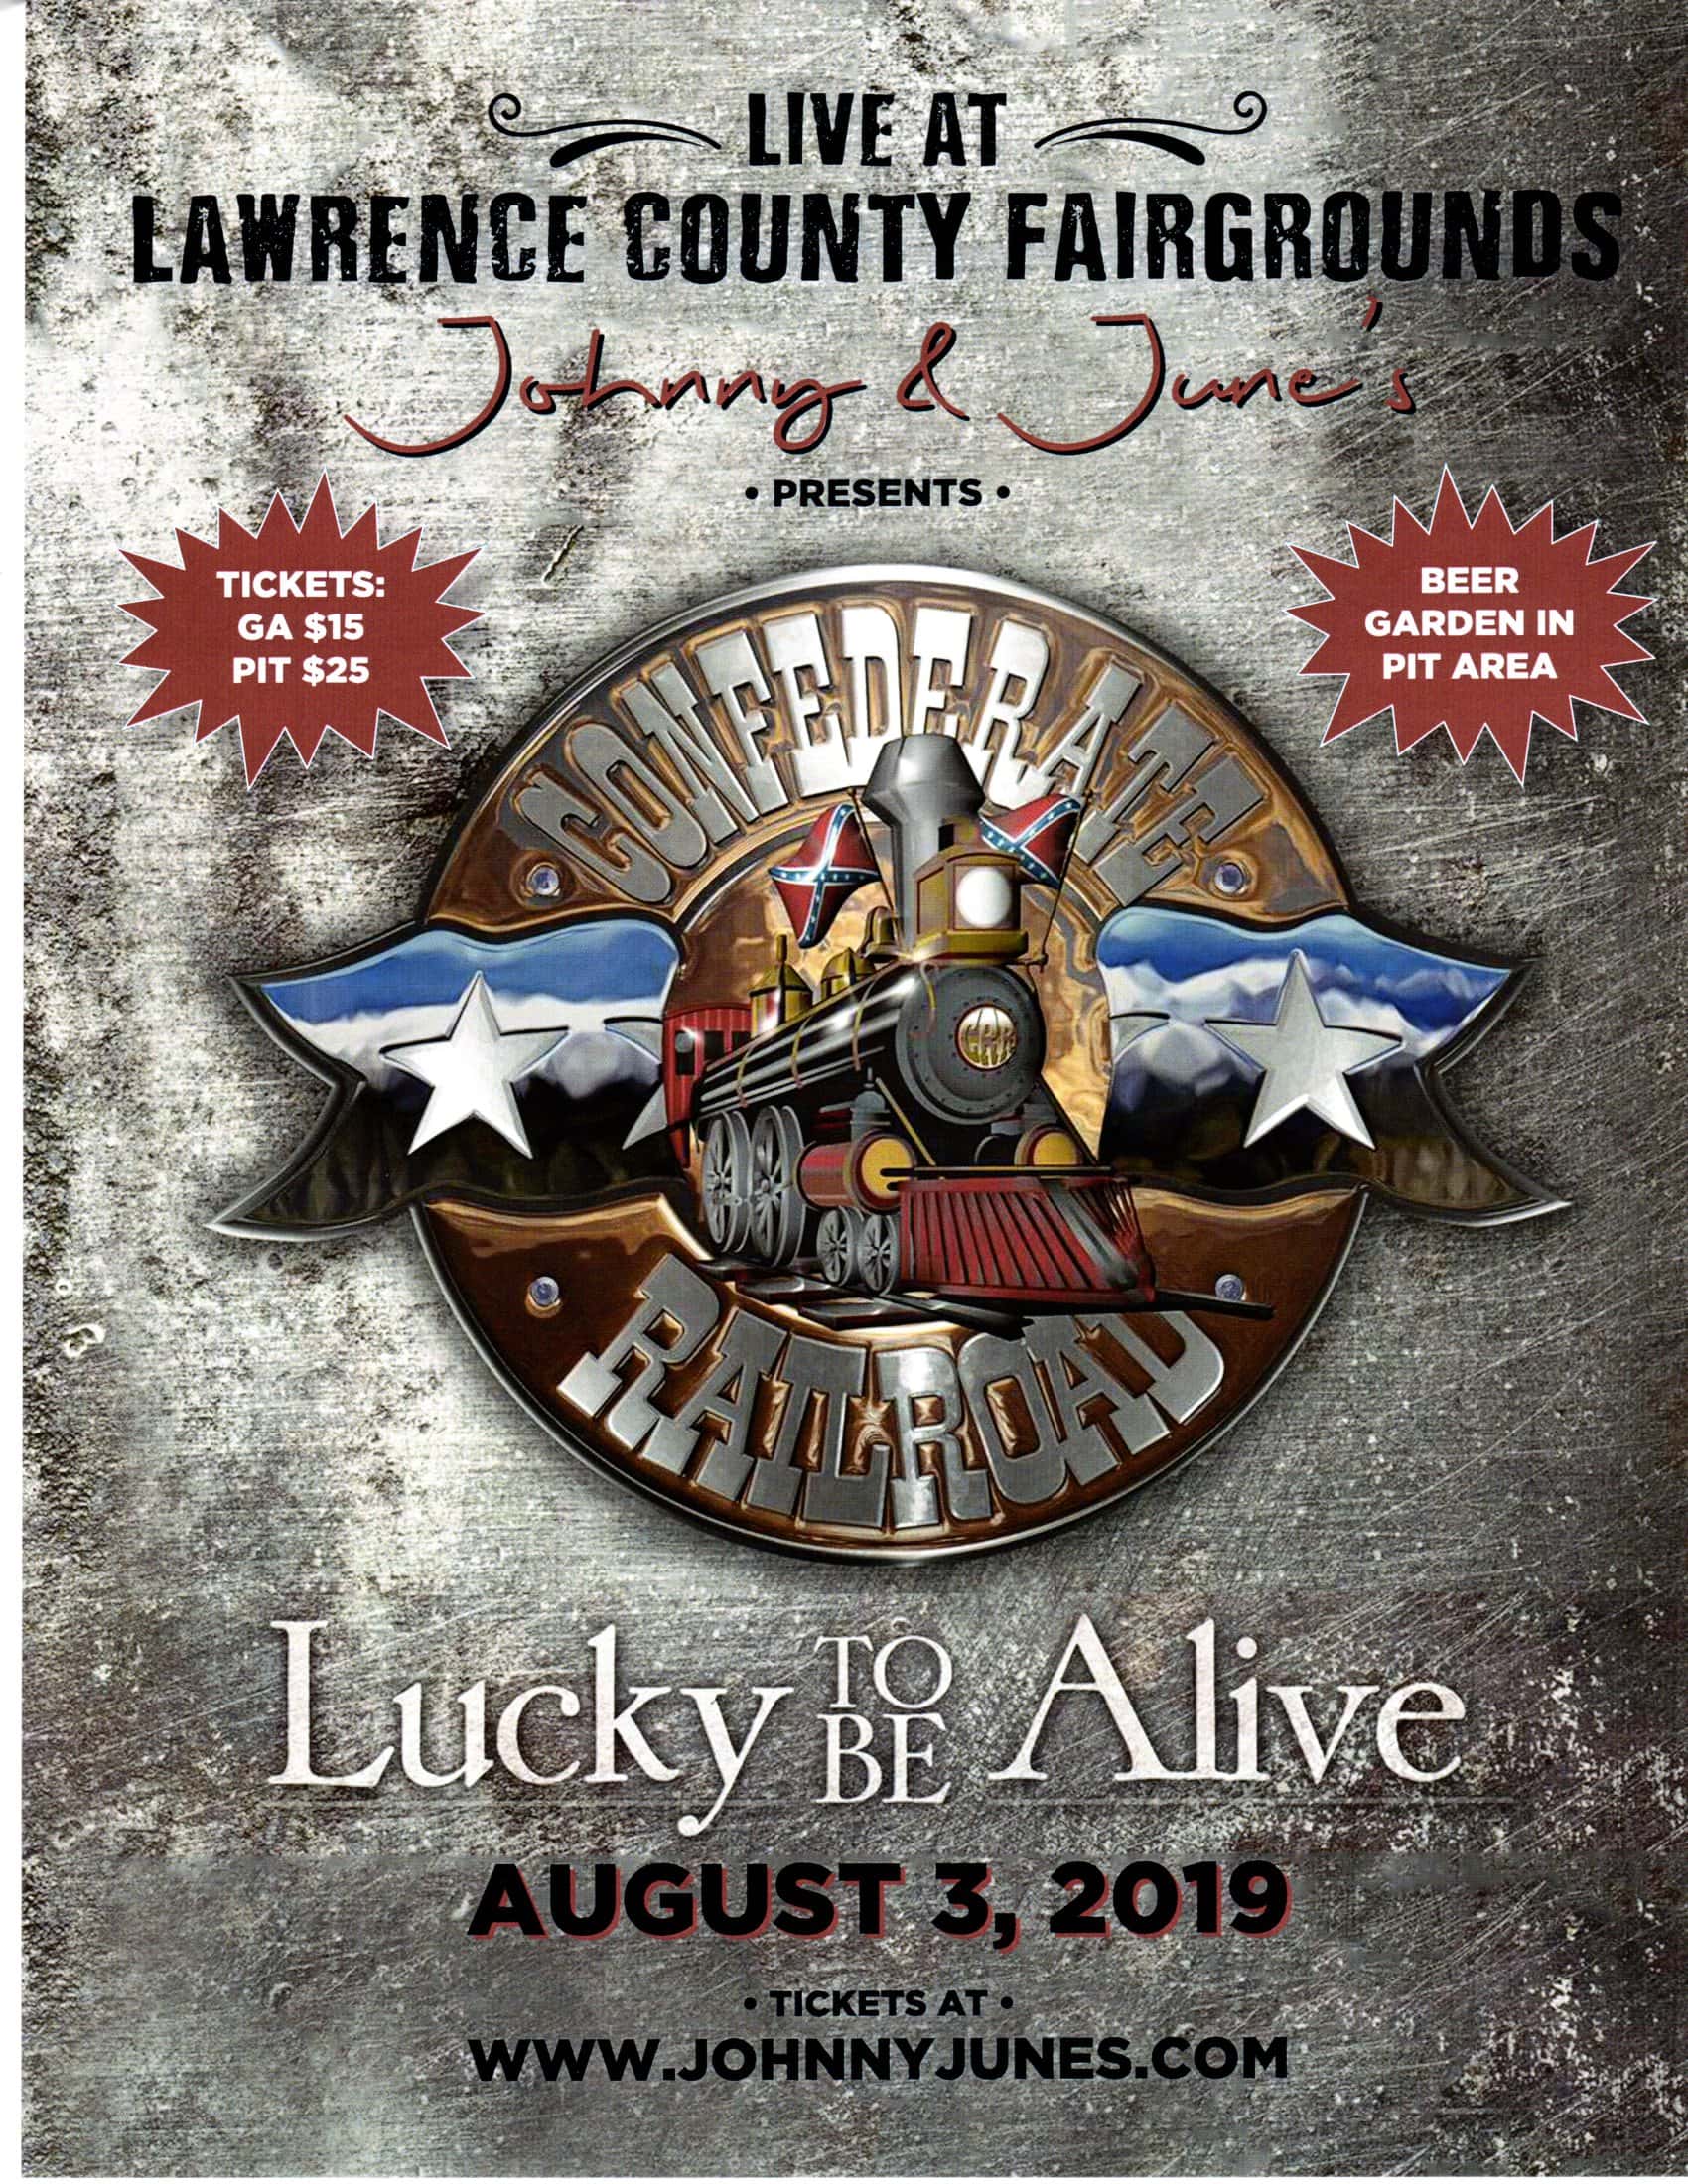 Confederate Railroad Lucky to be Alive Tour 103 Lite Hits WAKOFM